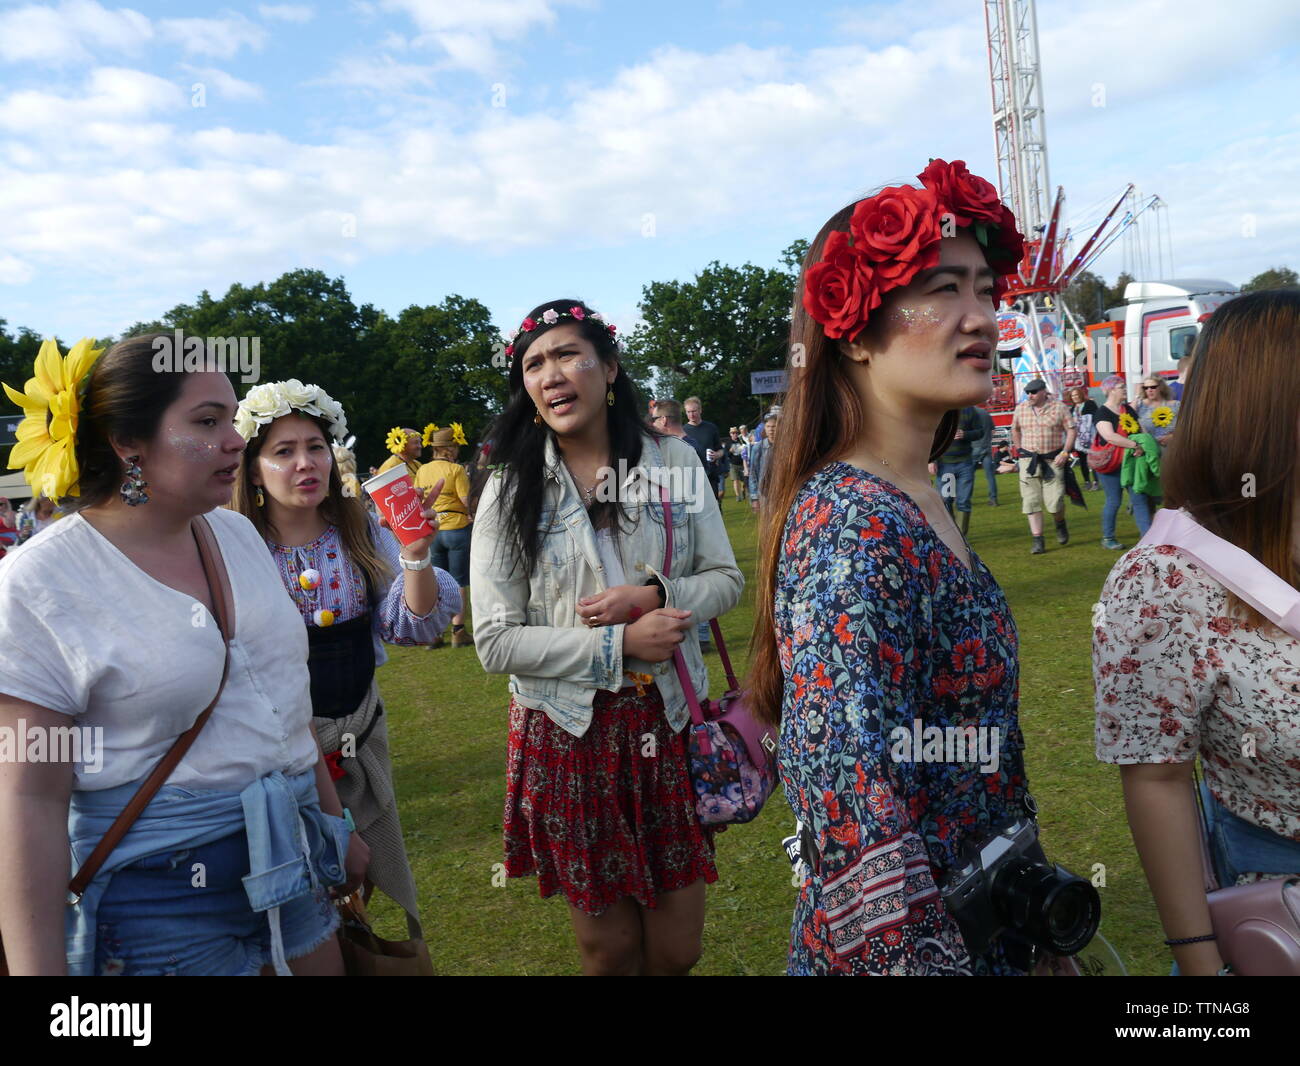 Newport, Isle of Wight - June 14th 2019: People milling around at the main stage event of the Isle of Wight Festival 2019. Credit: Katherine Da Silva Stock Photo